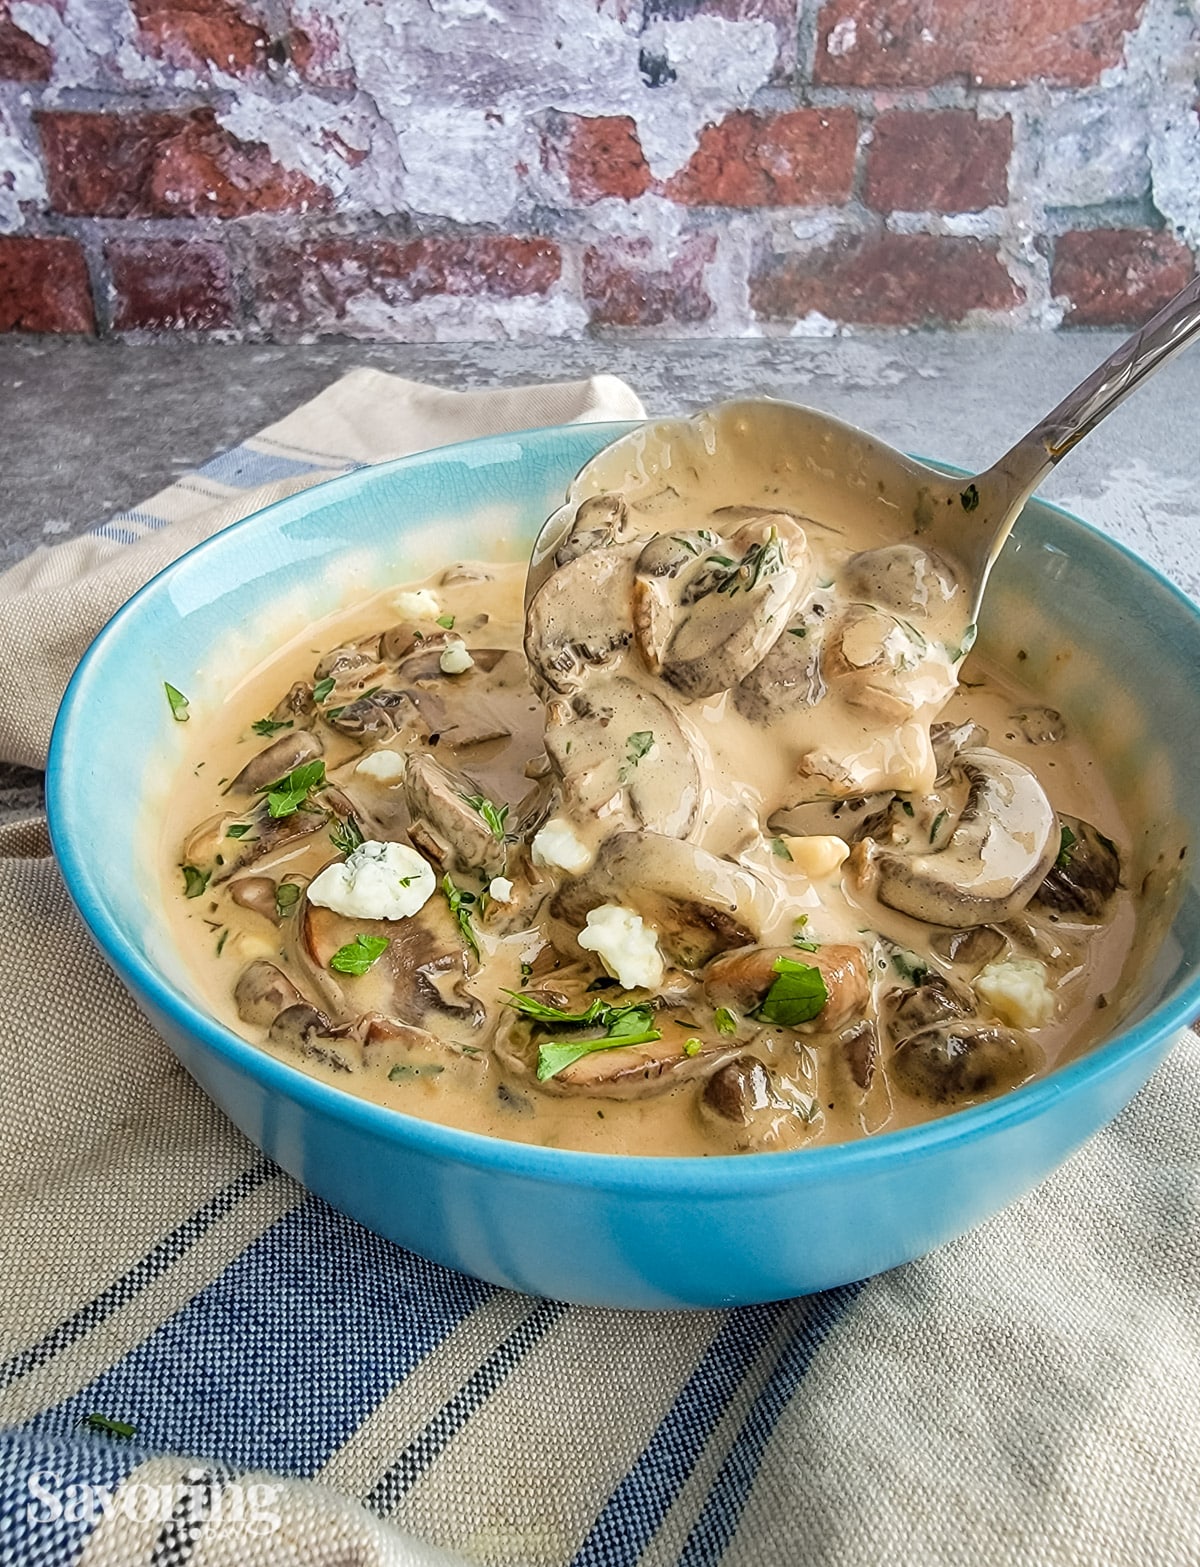 mushroom sauce with a ladle scooping into it